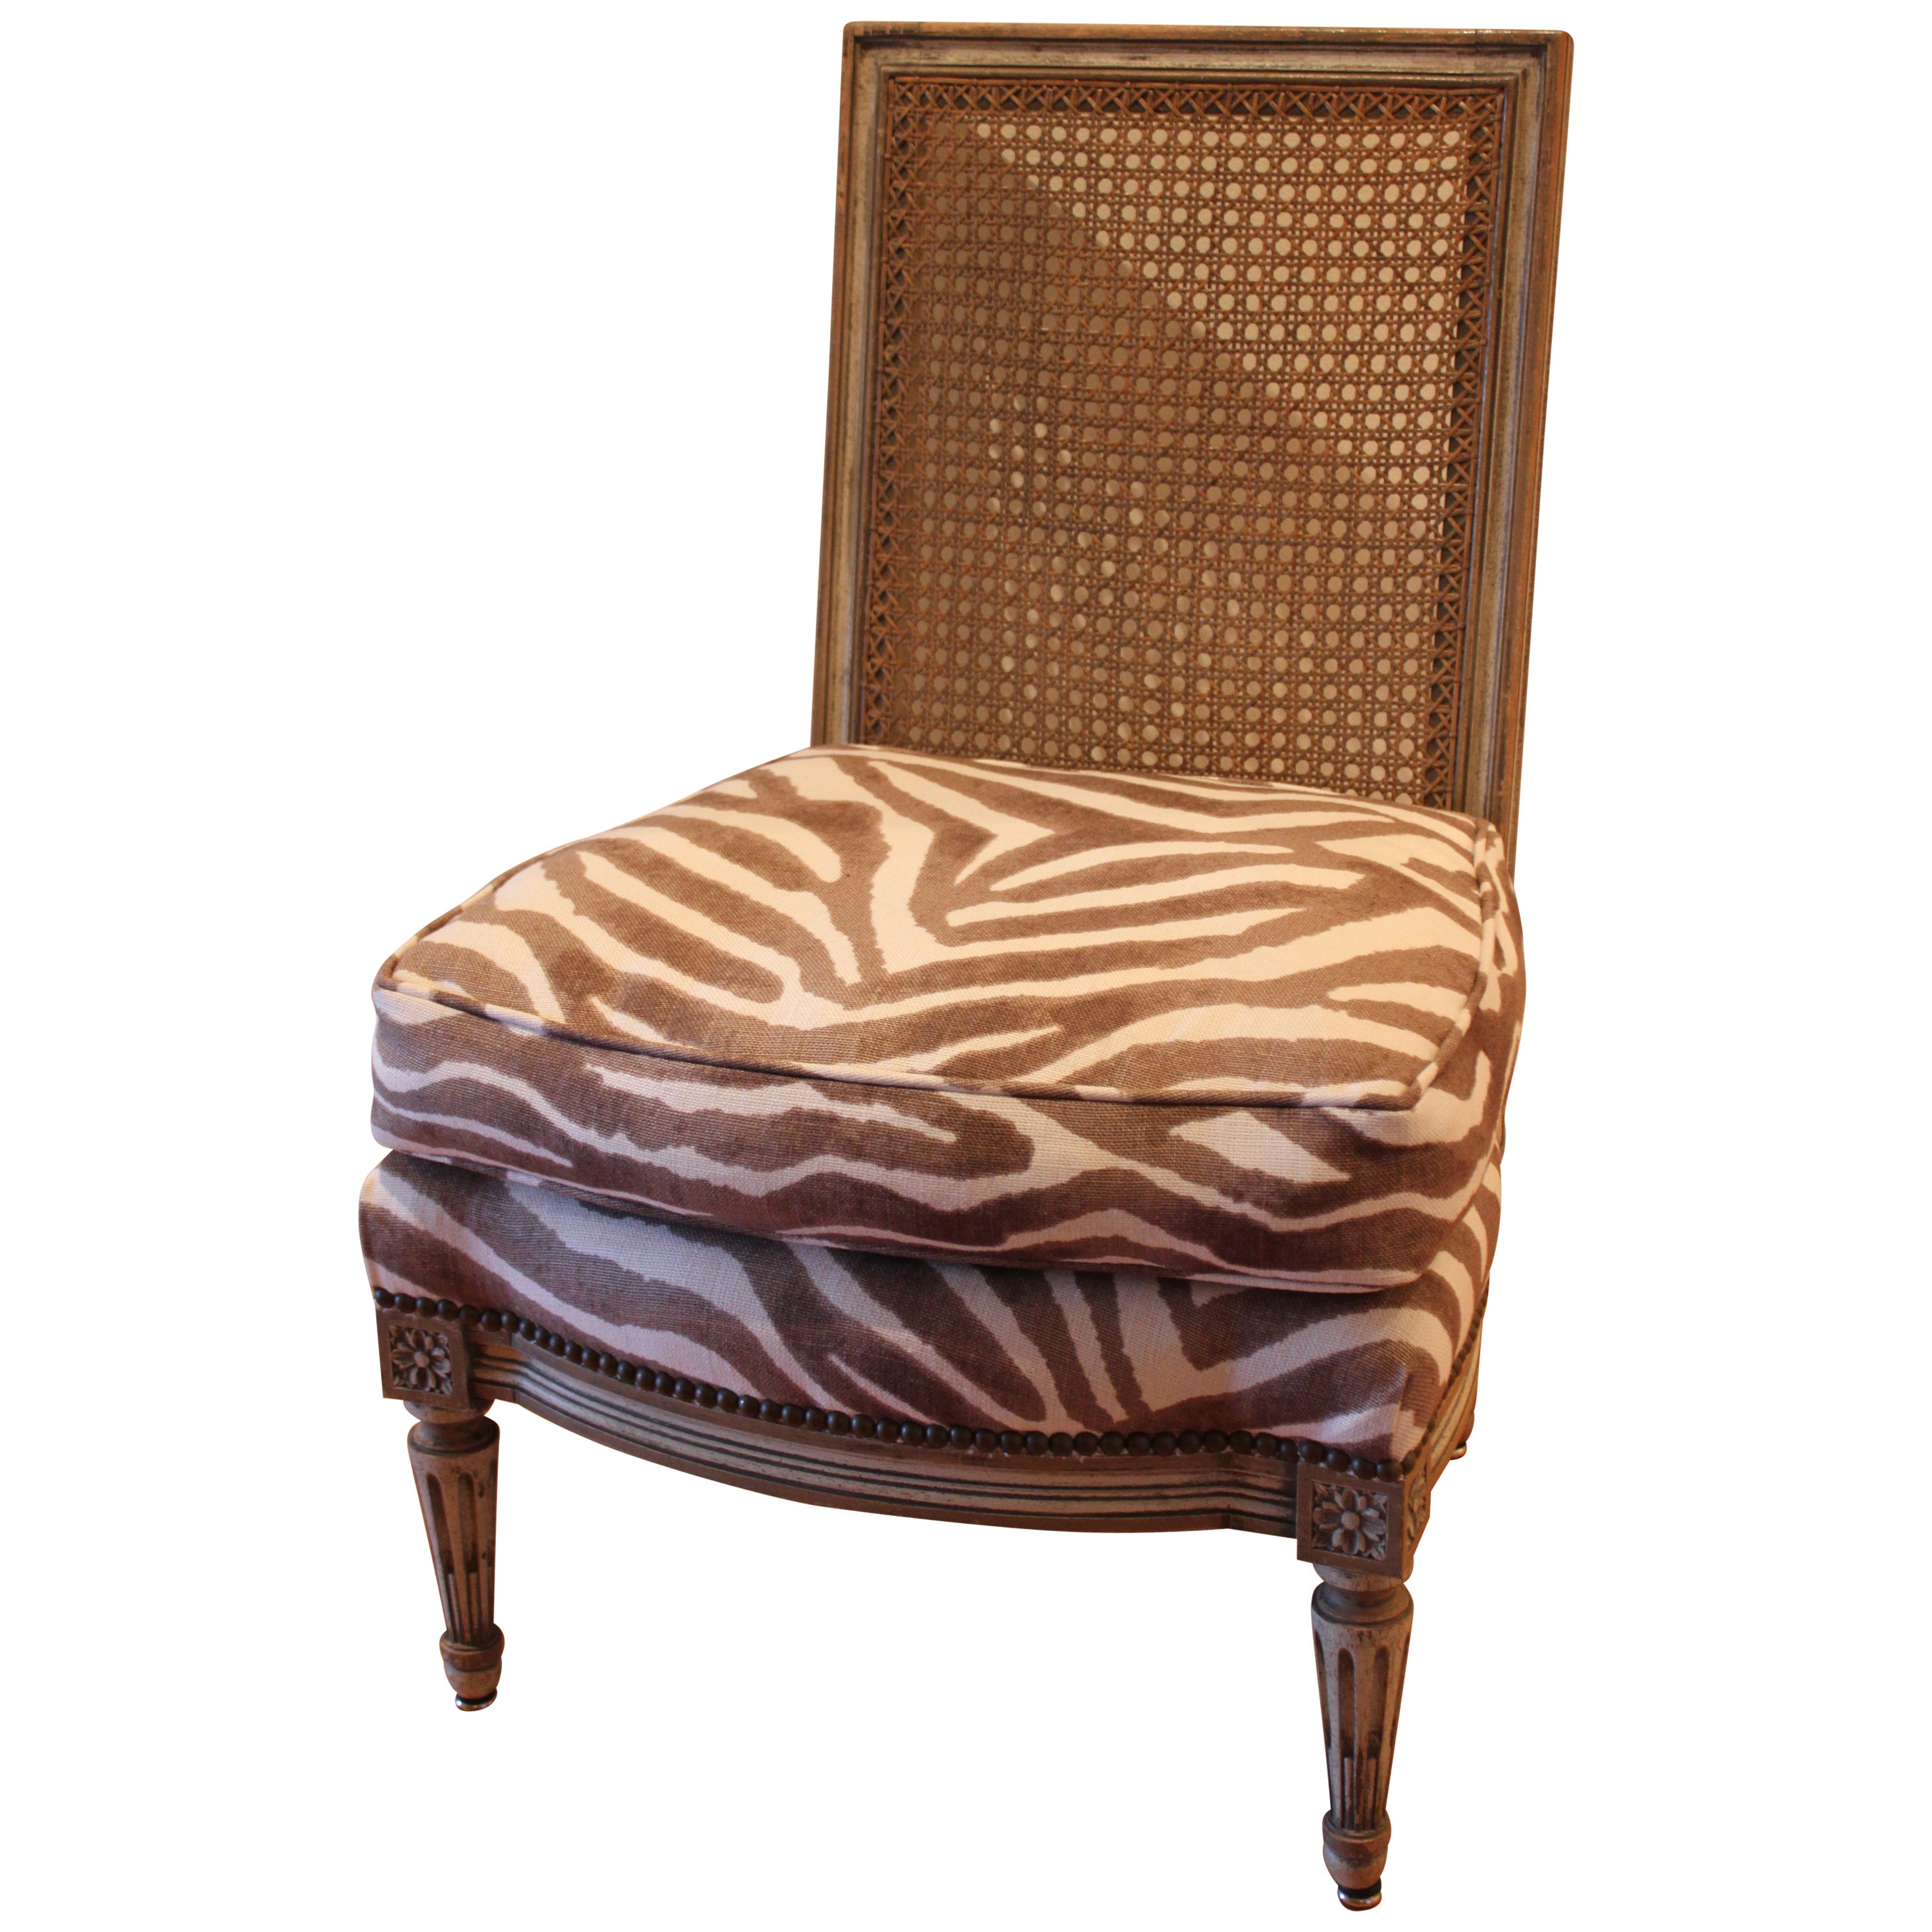 Louis XVI Style Caned Back Slipper Chair with Upholstered Seat, 20th Century